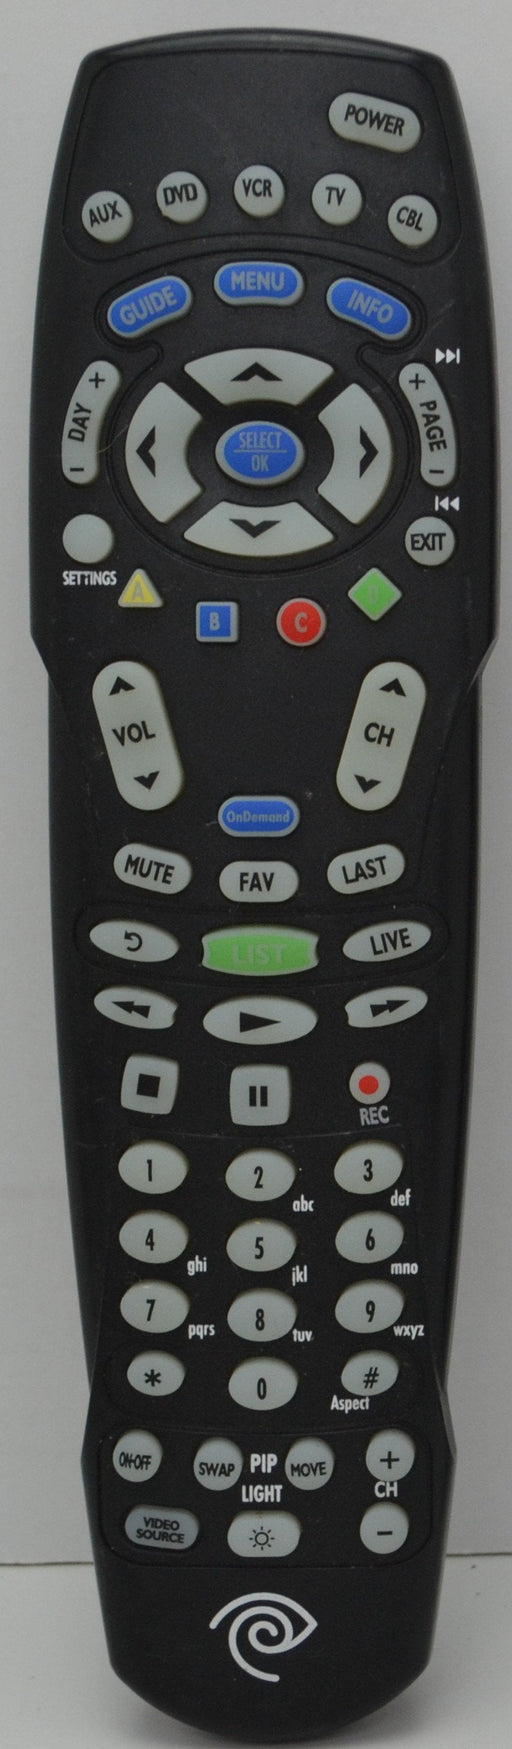 Time Warner Cable RC122 Remote Control for Cable Television-Remote-SpenCertified-refurbished-vintage-electonics